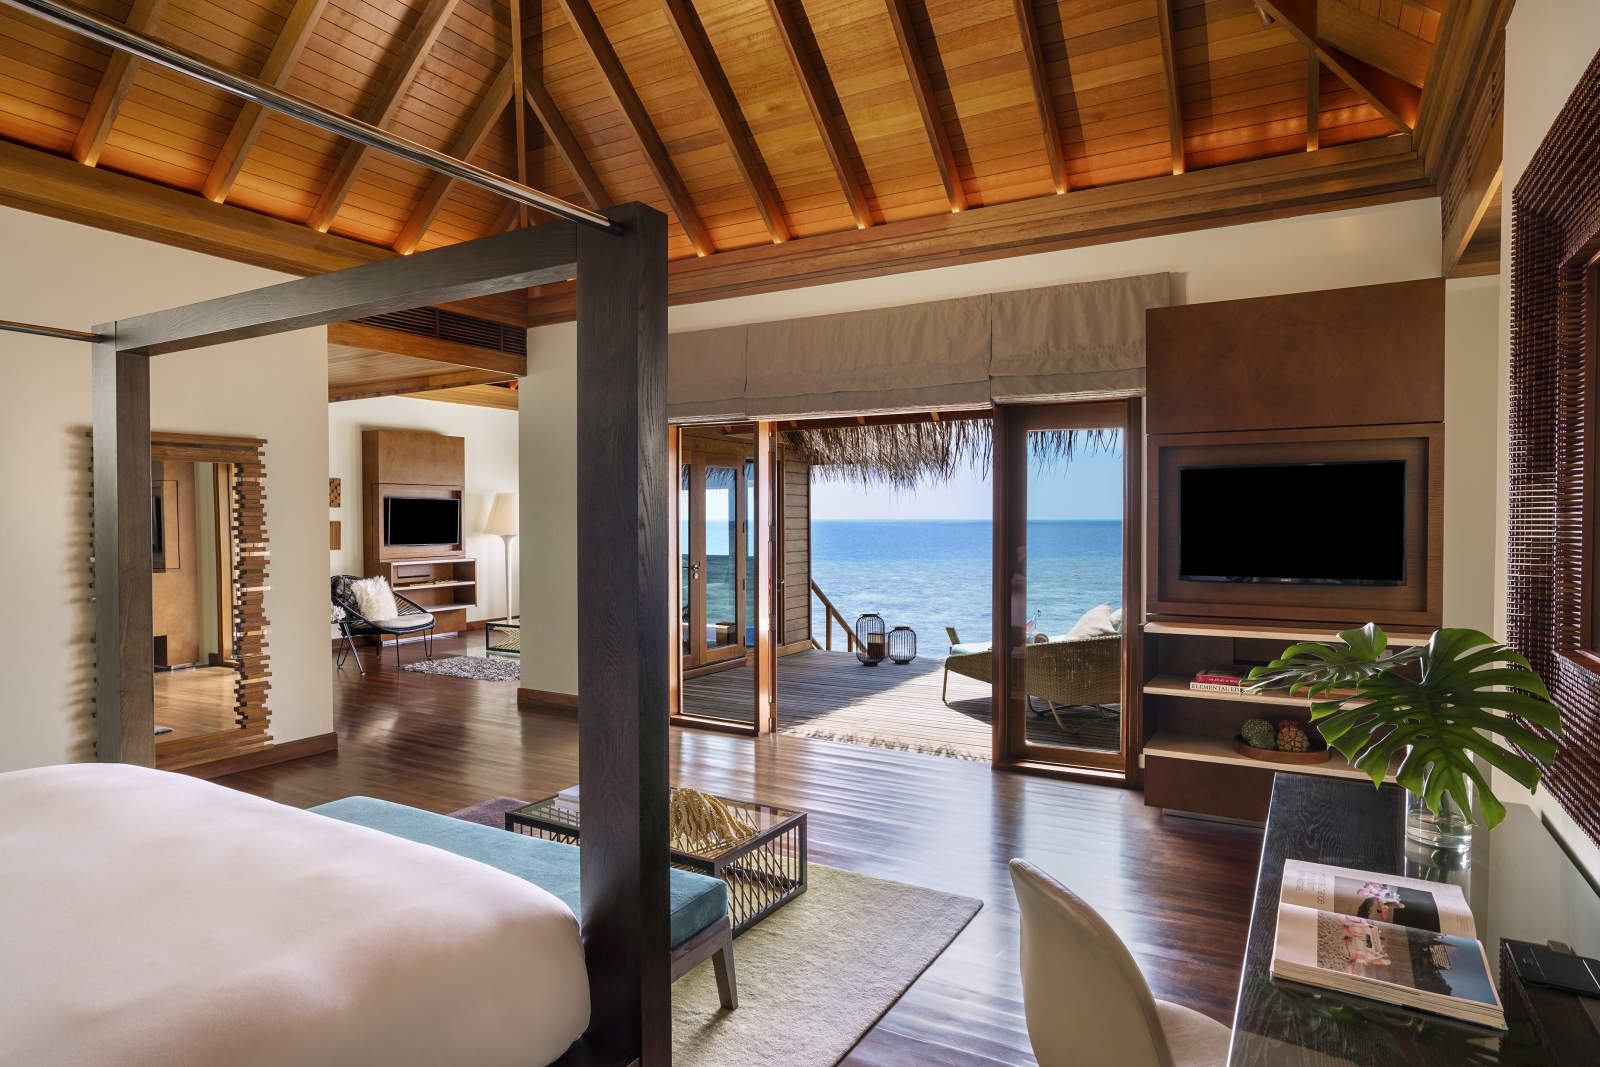 Bedroom with private terrace of an Ocean Pavilion at luxury resort Huvafen Fushi in the Maldives